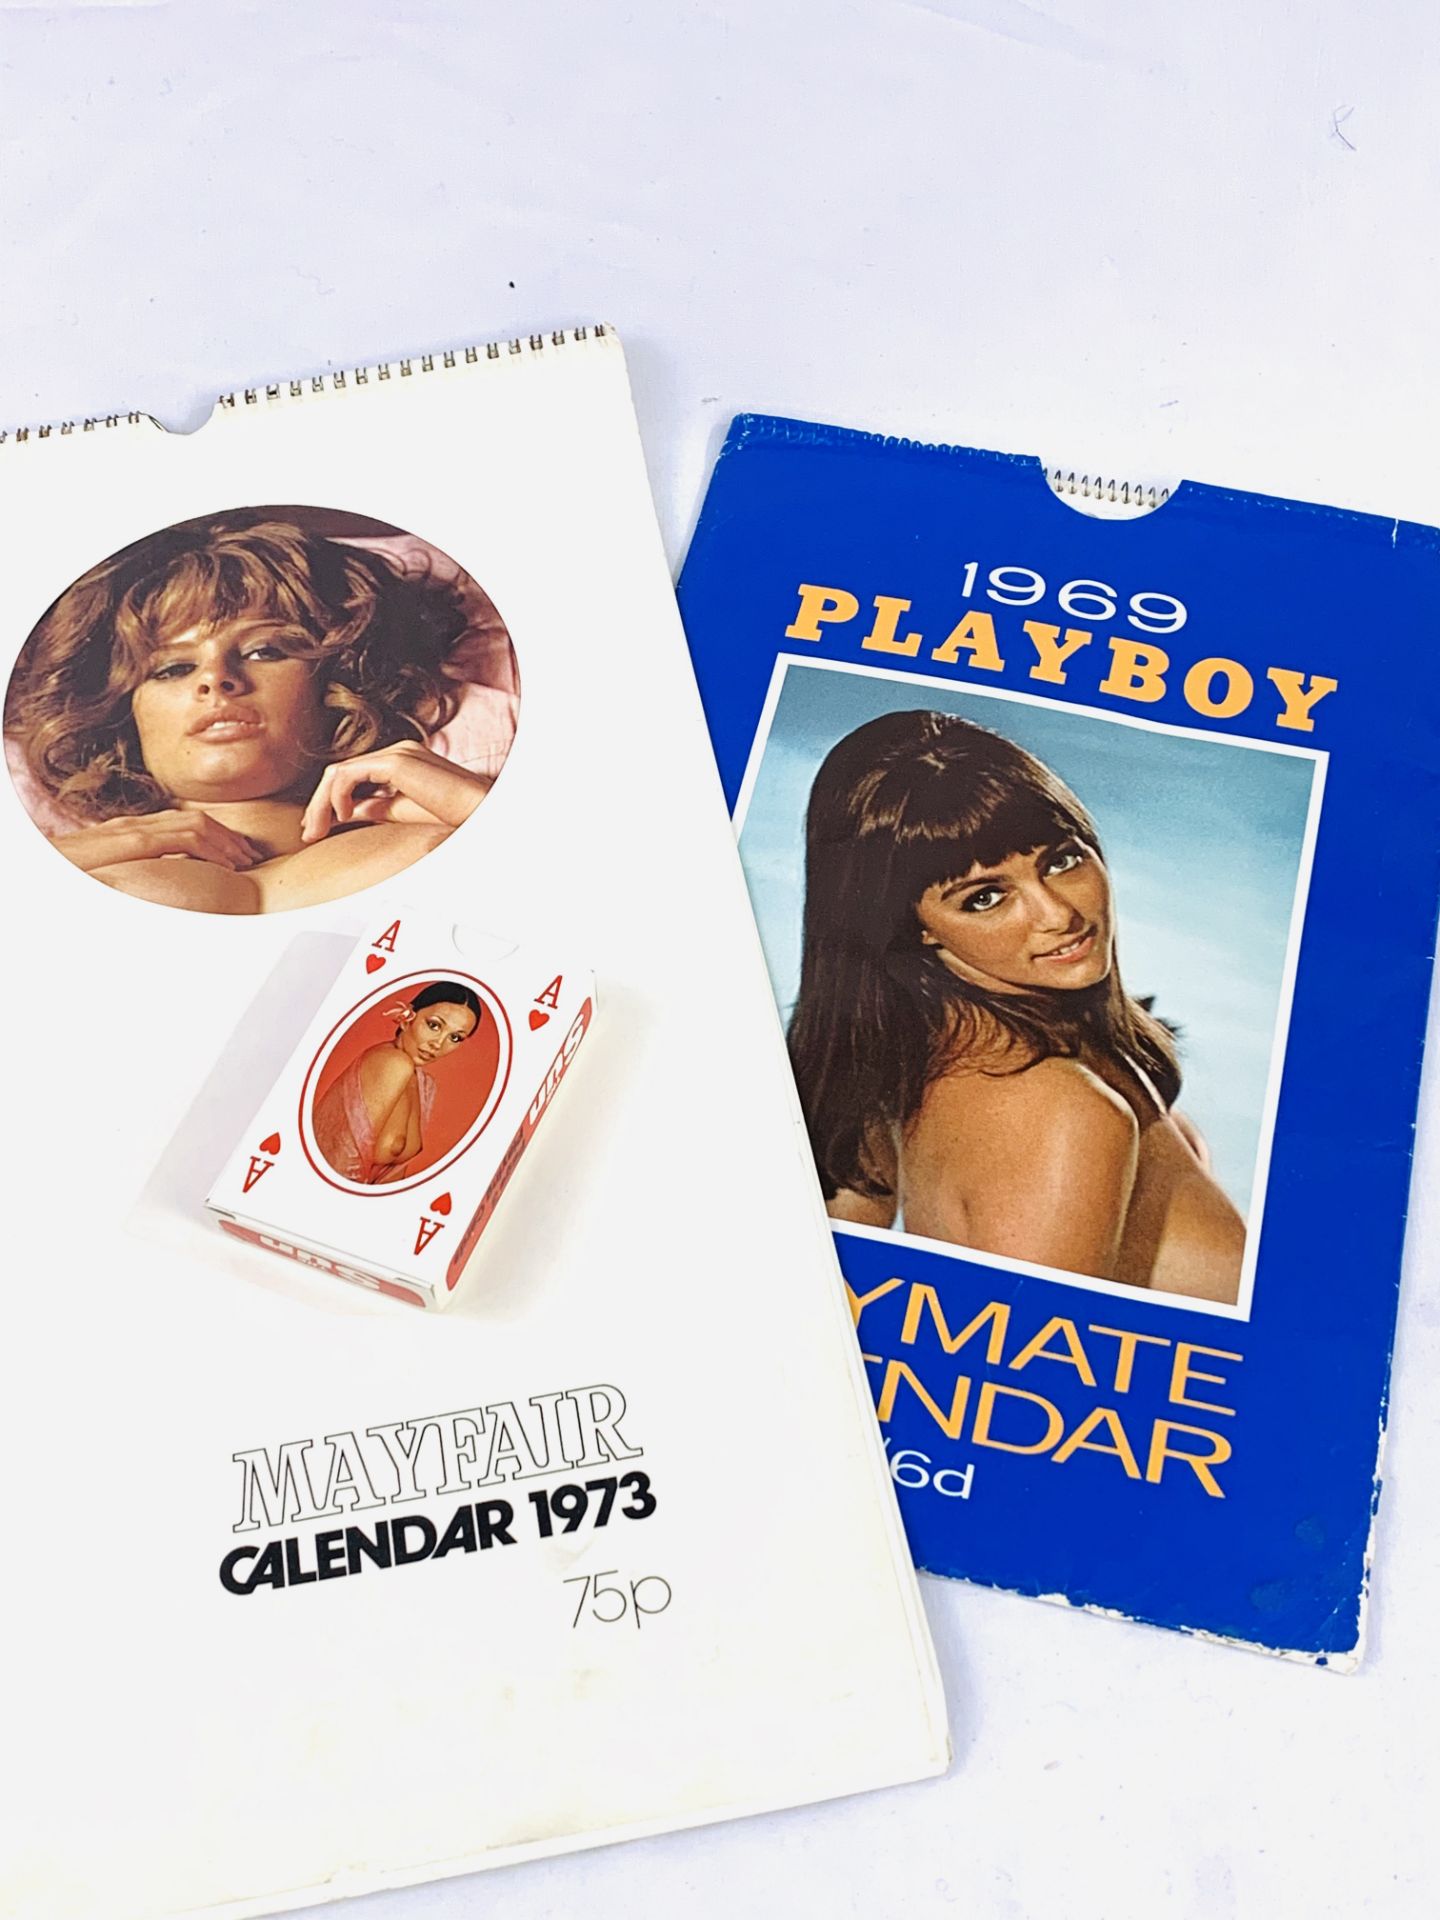 'Mayfair' 1973 calendar; pack of unused Sun Page 3 playing cards; 1969 'Playboy' calendar. - Image 2 of 2